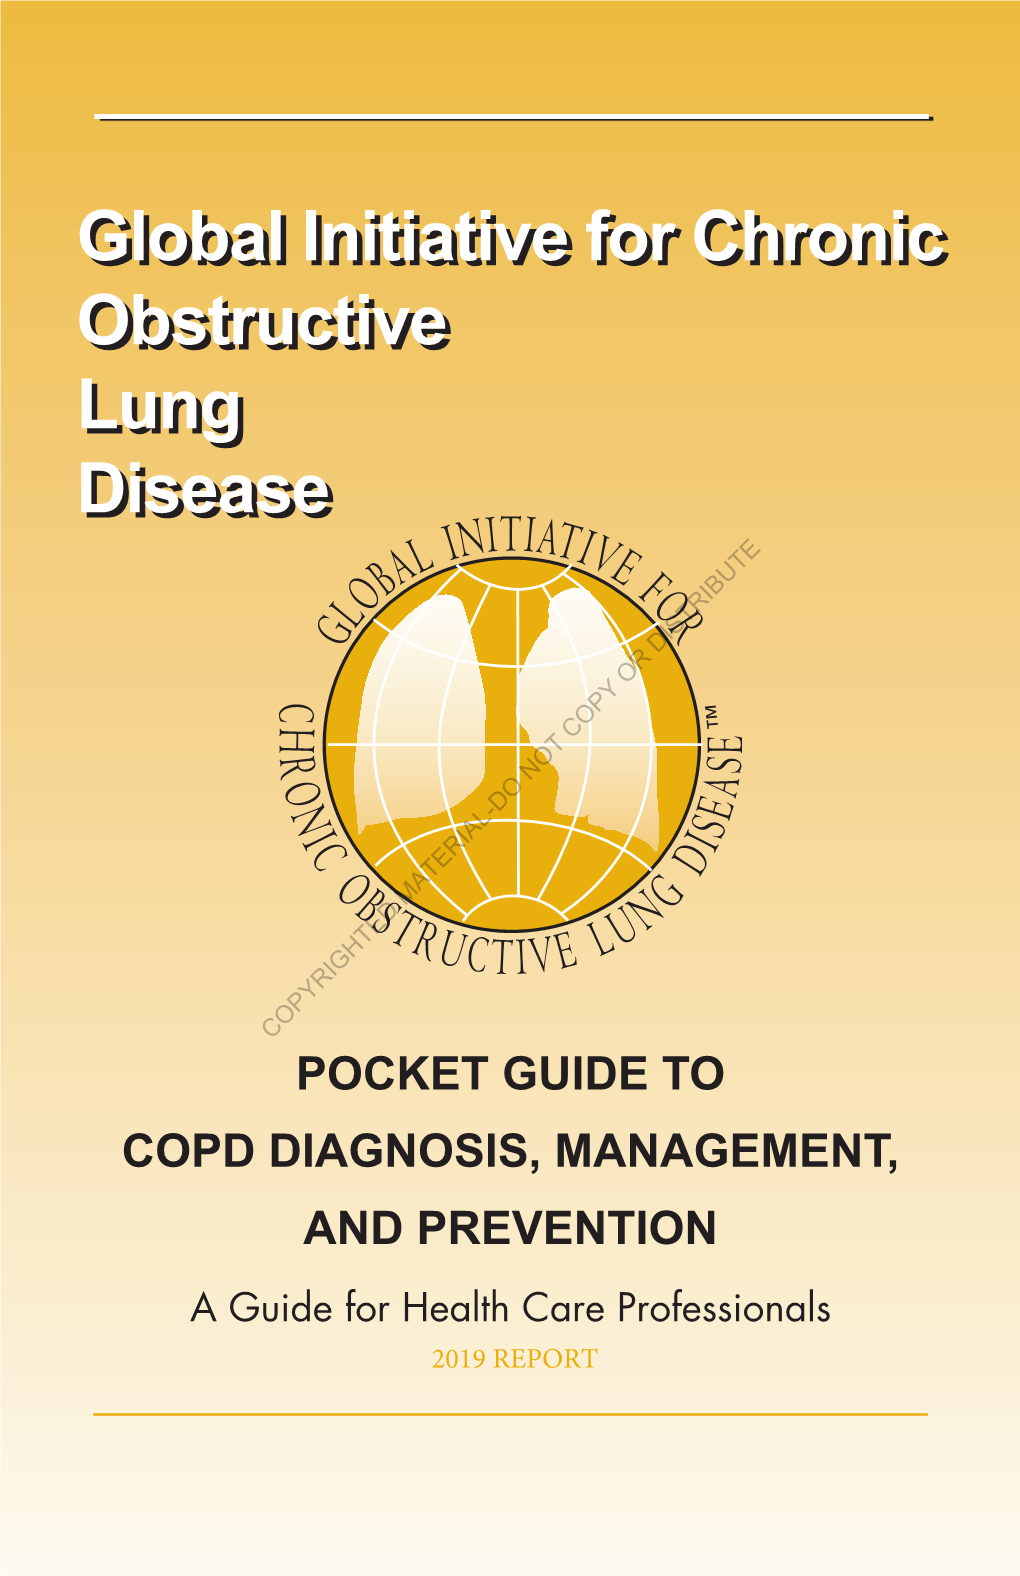 POCKET GUIDE to COPD DIAGNOSIS, MANAGEMENT, and PREVENTION a Guide for Health Care Professionals 2019 REPORT GLOBAL INITIATIVE for CHRONIC OBSTRUCTIVE LUNG DISEASE